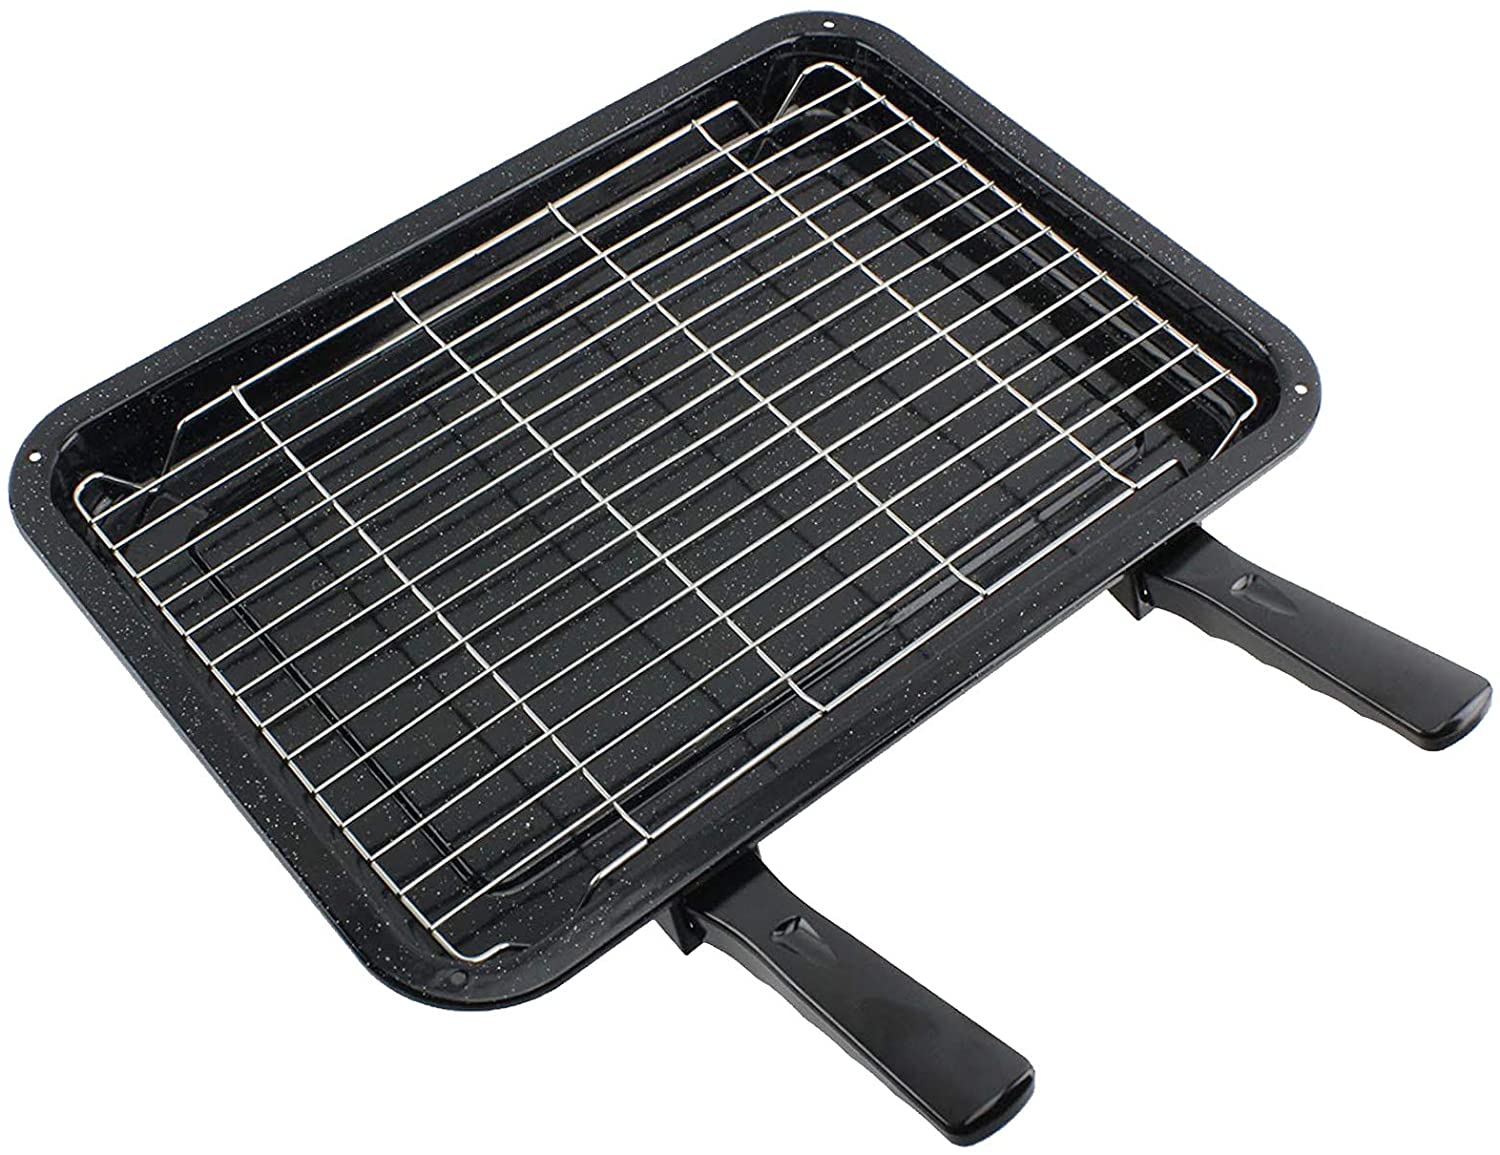 Medium Grill Pan, Rack & Dual Detachable Handles with Adjustable Shelf for STOVES Oven Cookers